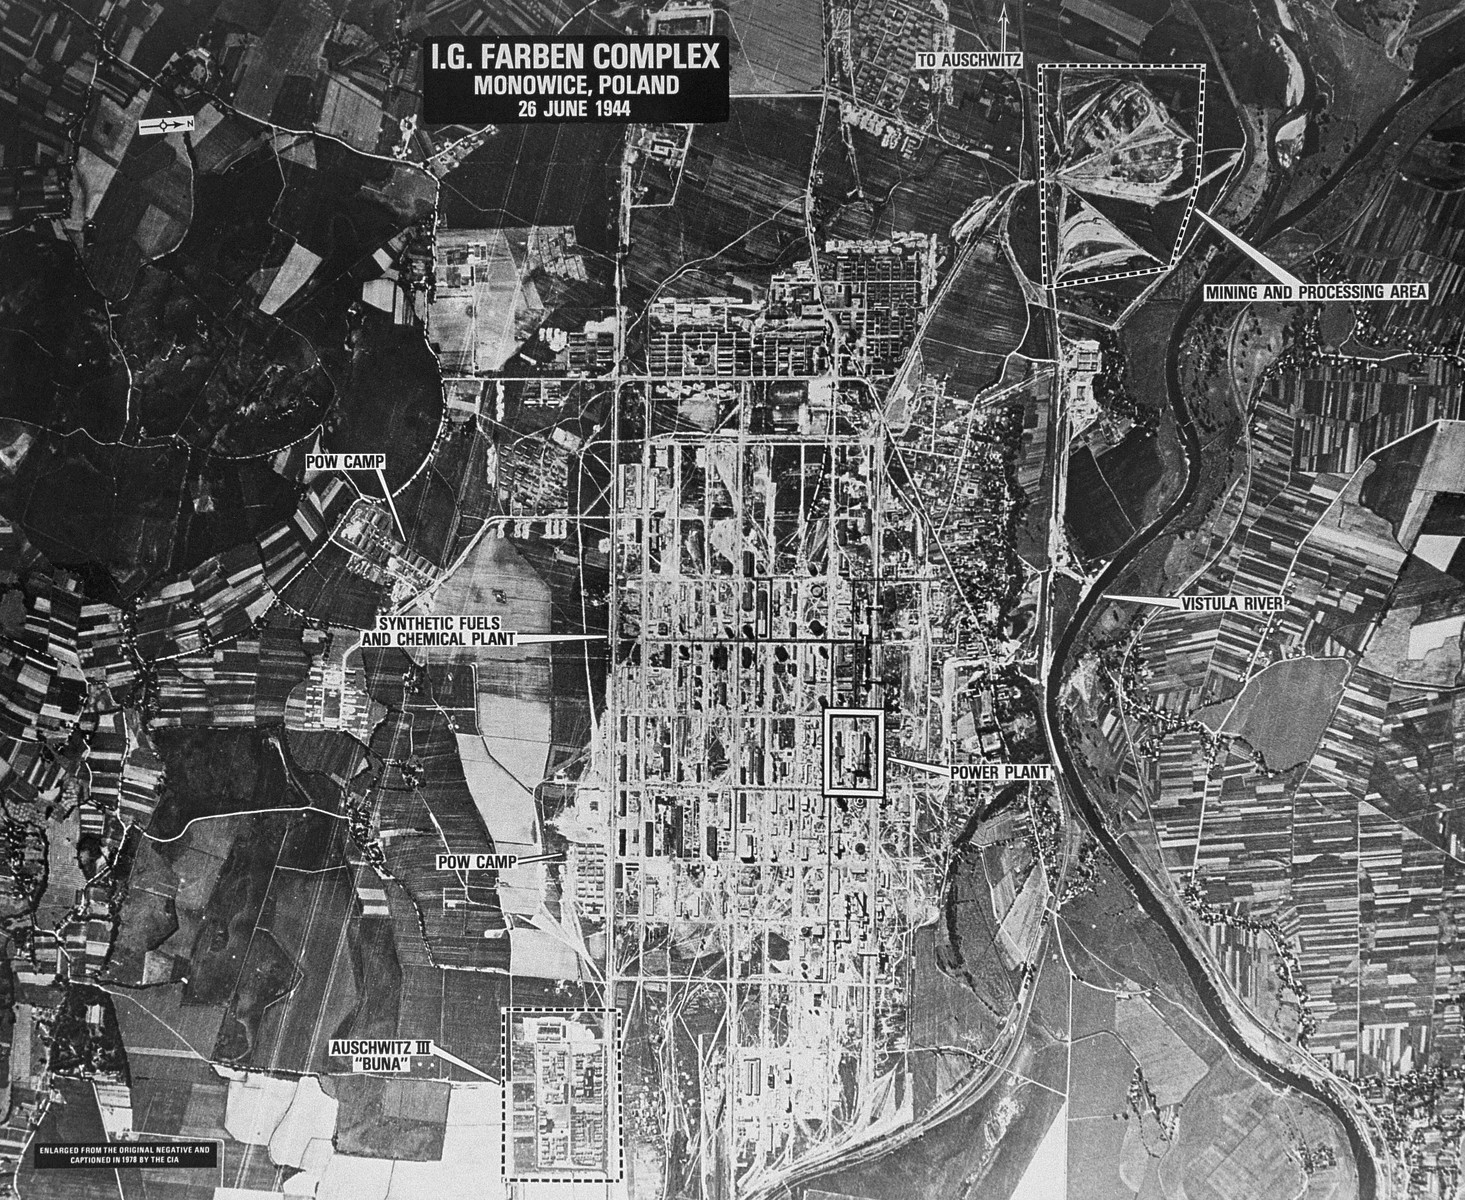 An aerial reconnaissance photograph showing the Auschwitz III (Monowitz) complex surrounding the I.G. Farben Buna production plant.